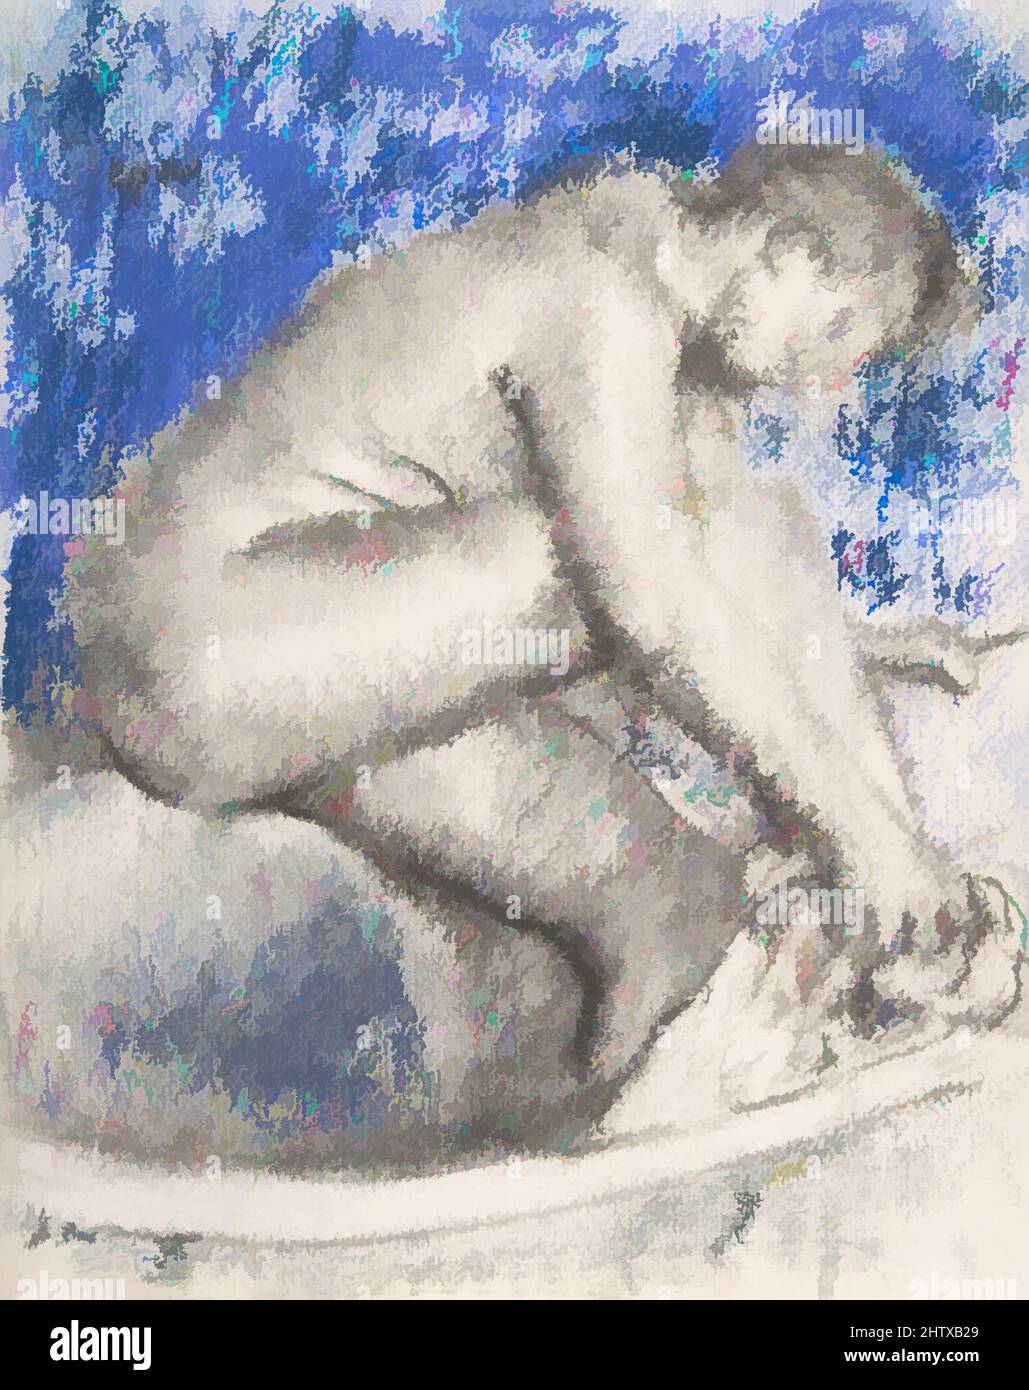 Art inspired by The Bath, 1895 or before, Charcoal and pastel on heavy wove paper, 12 5/8 x 10 1/8 in. (32.1 x 25.7 cm), Drawings, Edgar Degas (French, Paris 1834–1917 Paris, Classic works modernized by Artotop with a splash of modernity. Shapes, color and value, eye-catching visual impact on art. Emotions through freedom of artworks in a contemporary way. A timeless message pursuing a wildly creative new direction. Artists turning to the digital medium and creating the Artotop NFT Stock Photo